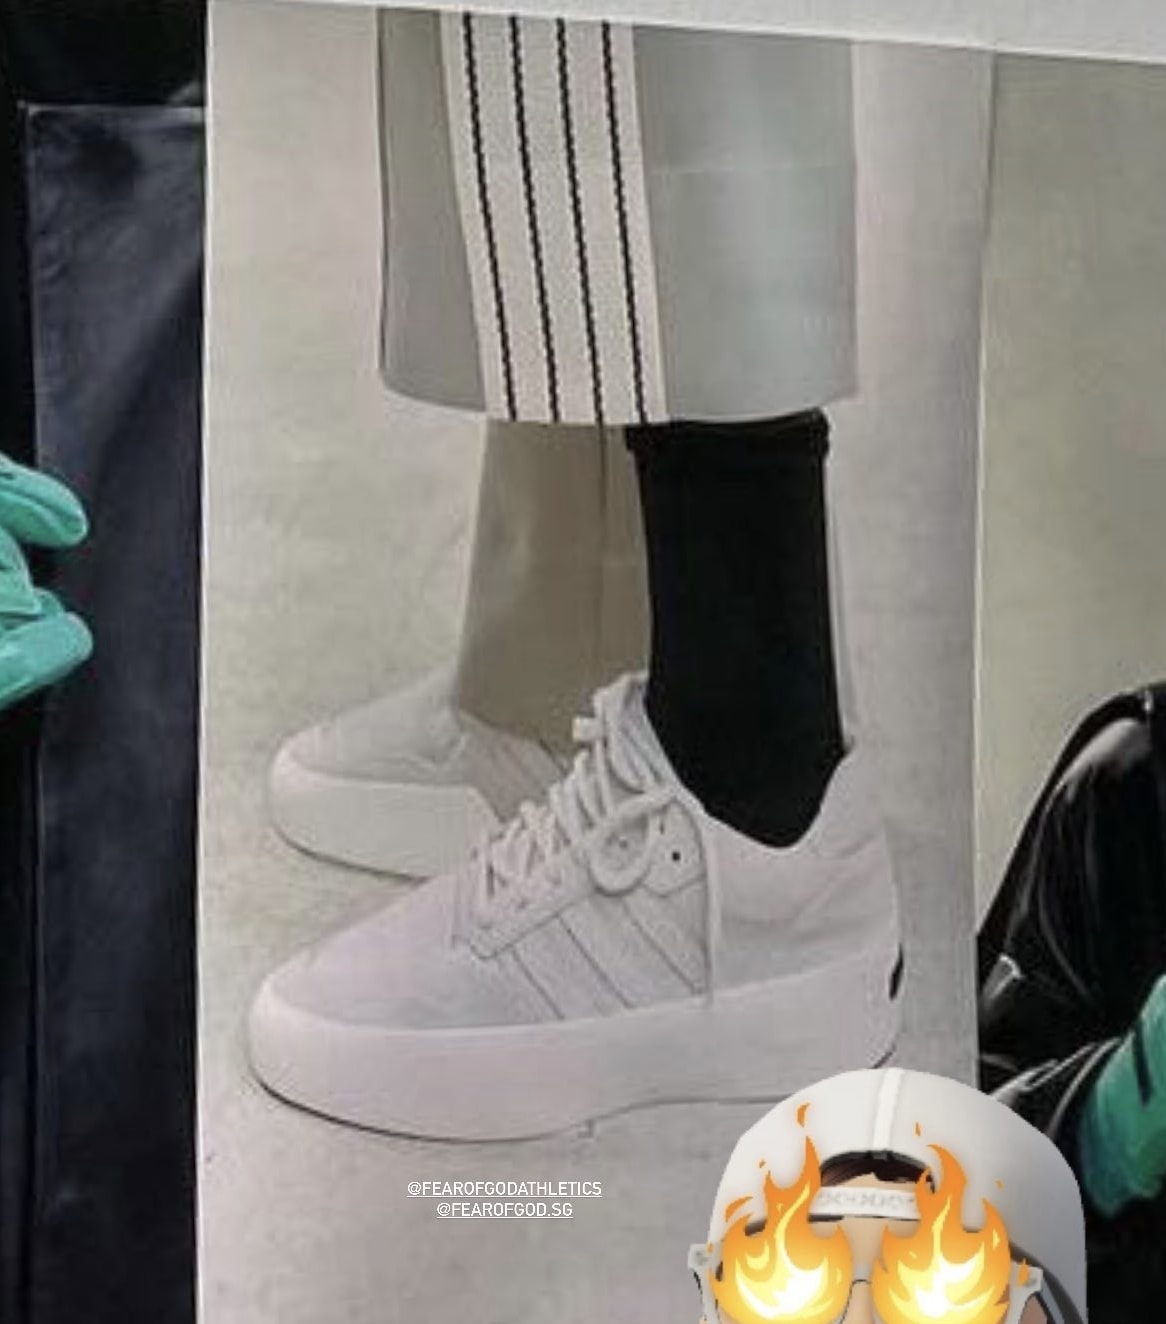 Jerry Lorenzo Previews More Fear of God x Adidas Collabs | Sole Collector